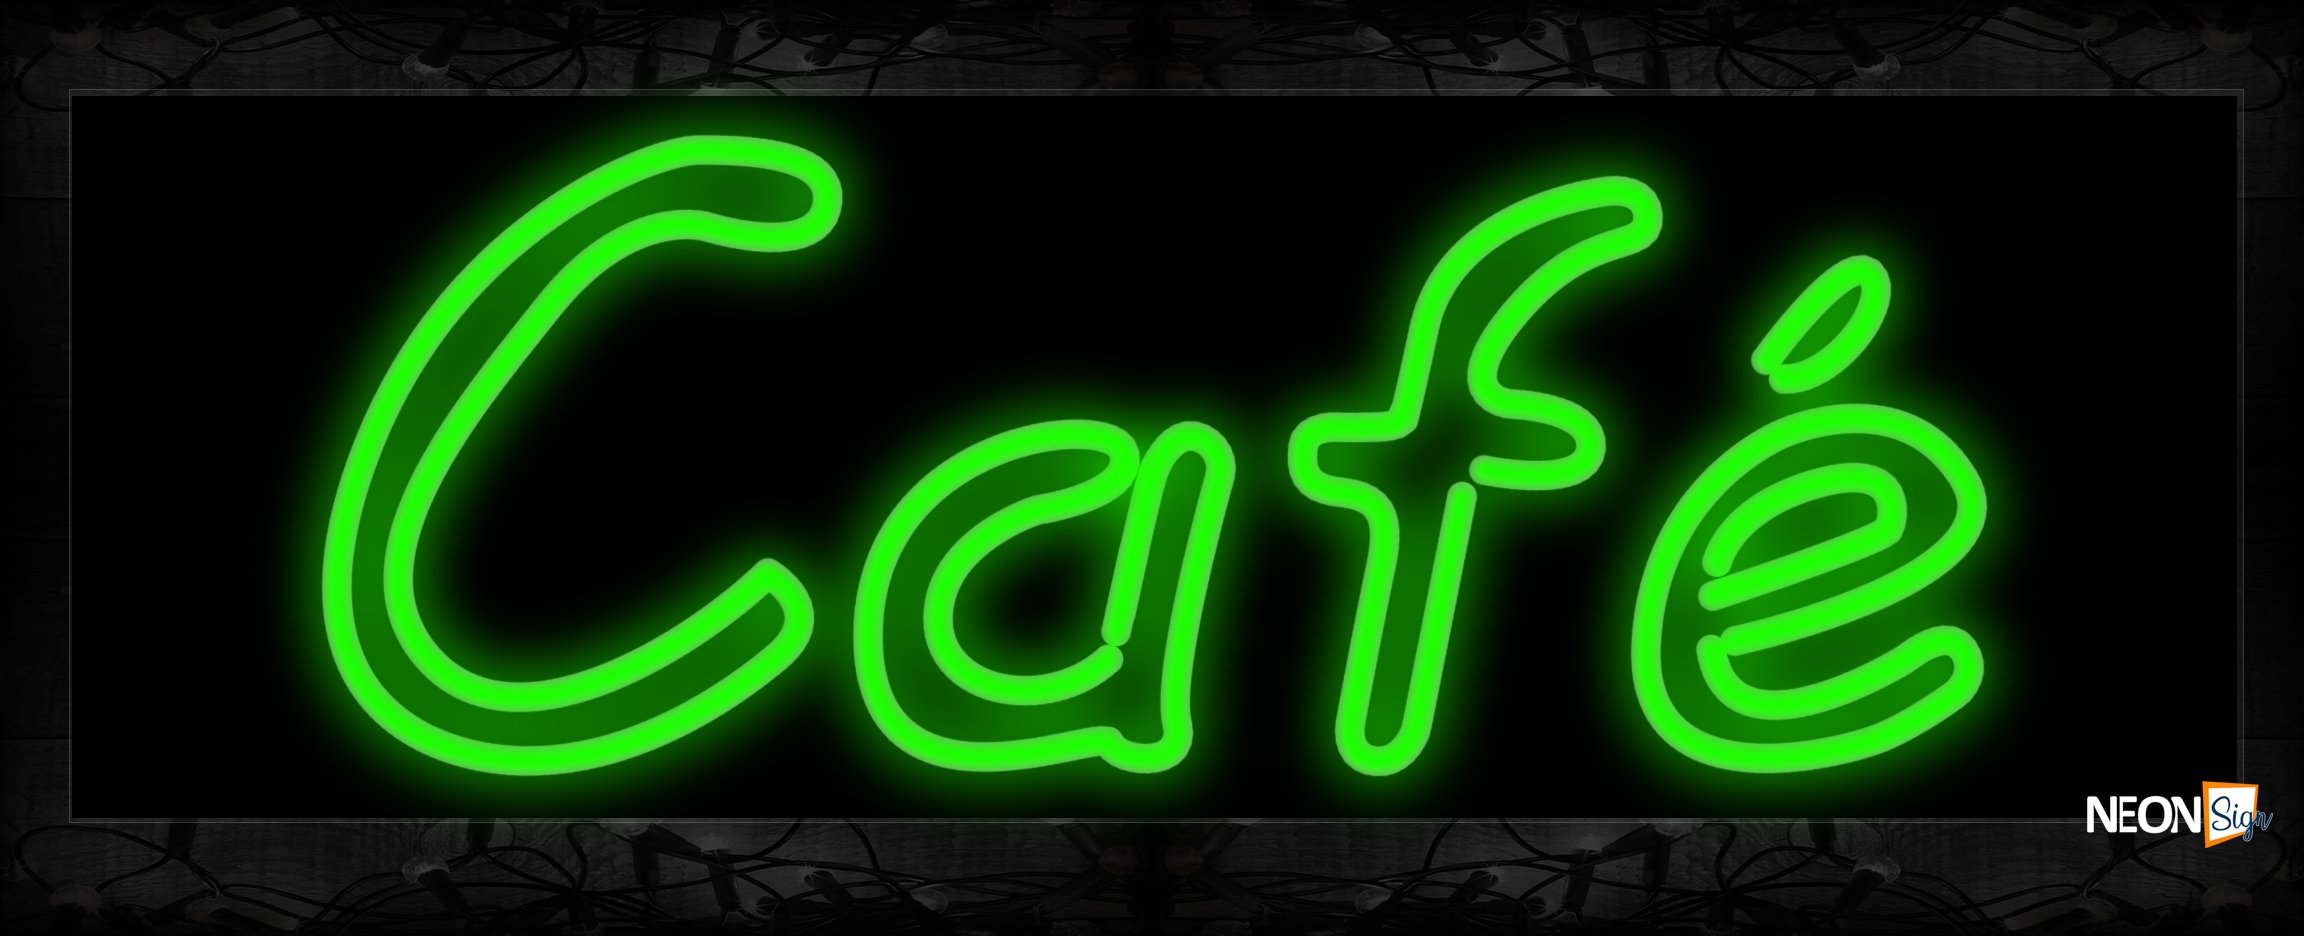 Image of 10155 Neon Sign 13x32 Black Backing